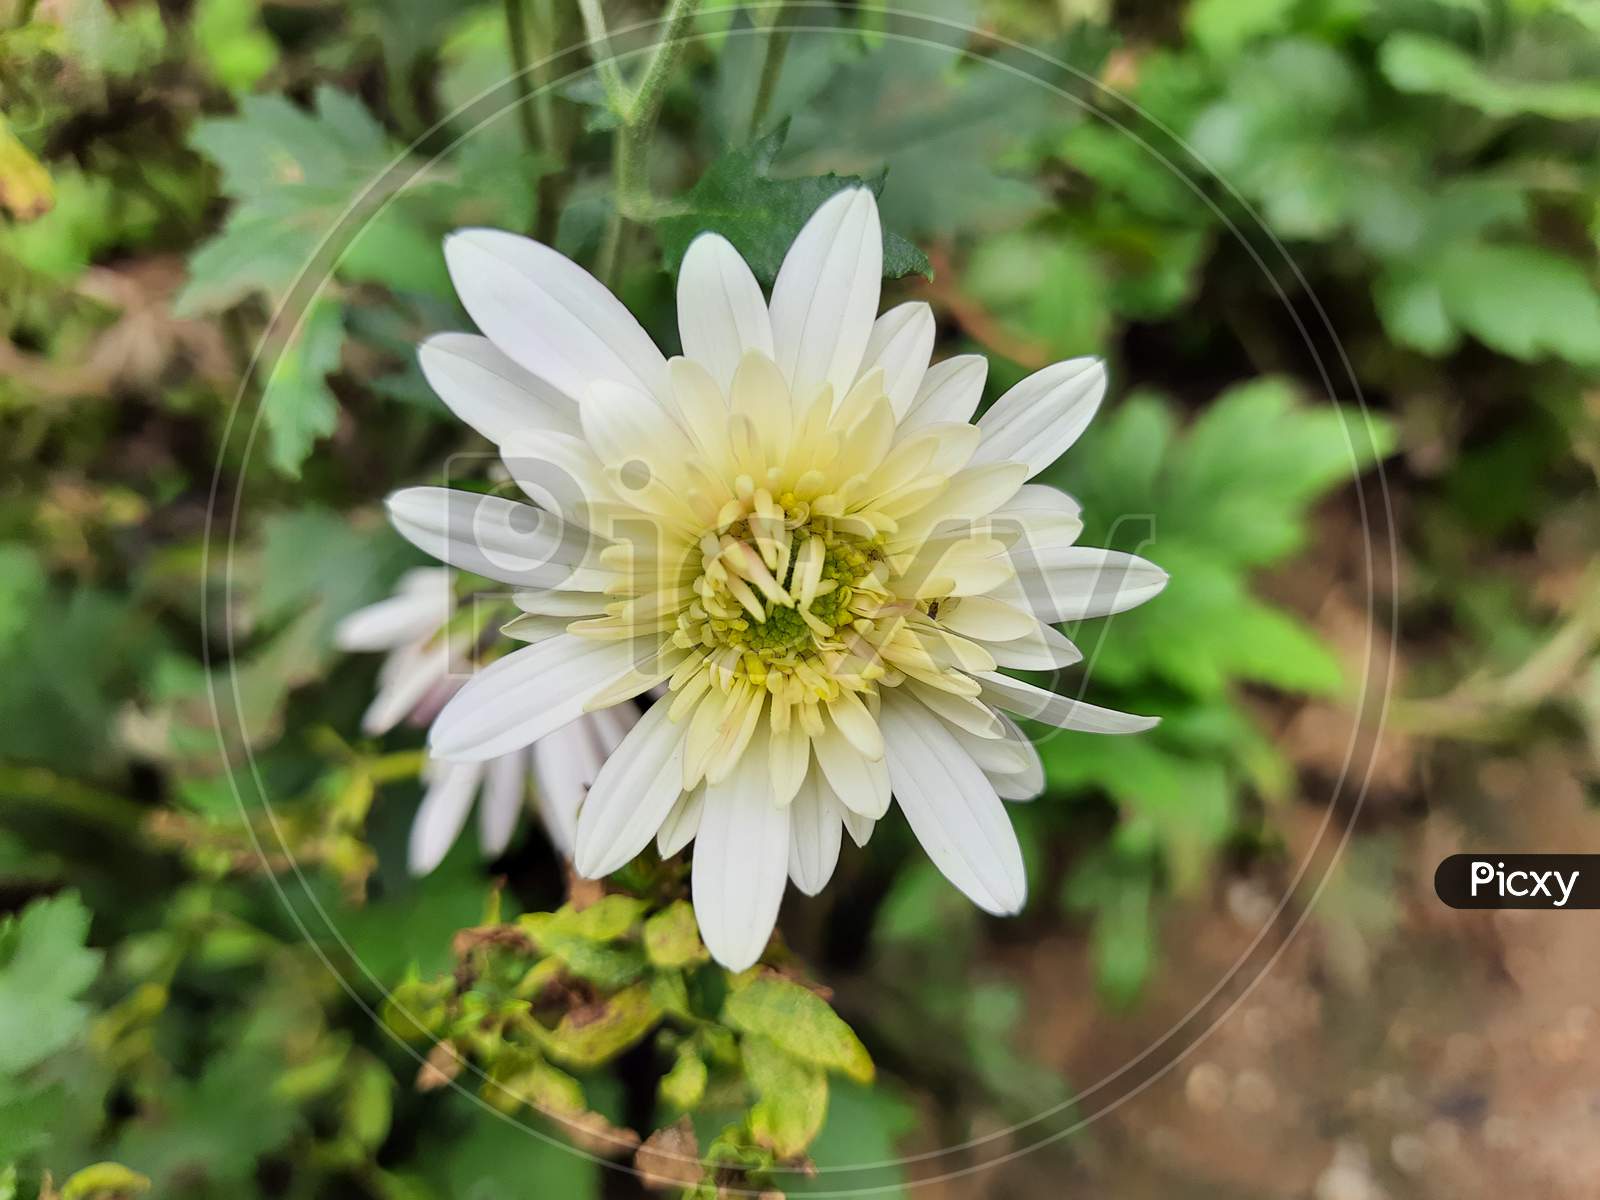 Beautiful white and yellow color aster or chrysanthemum flower in a plant leaves green background